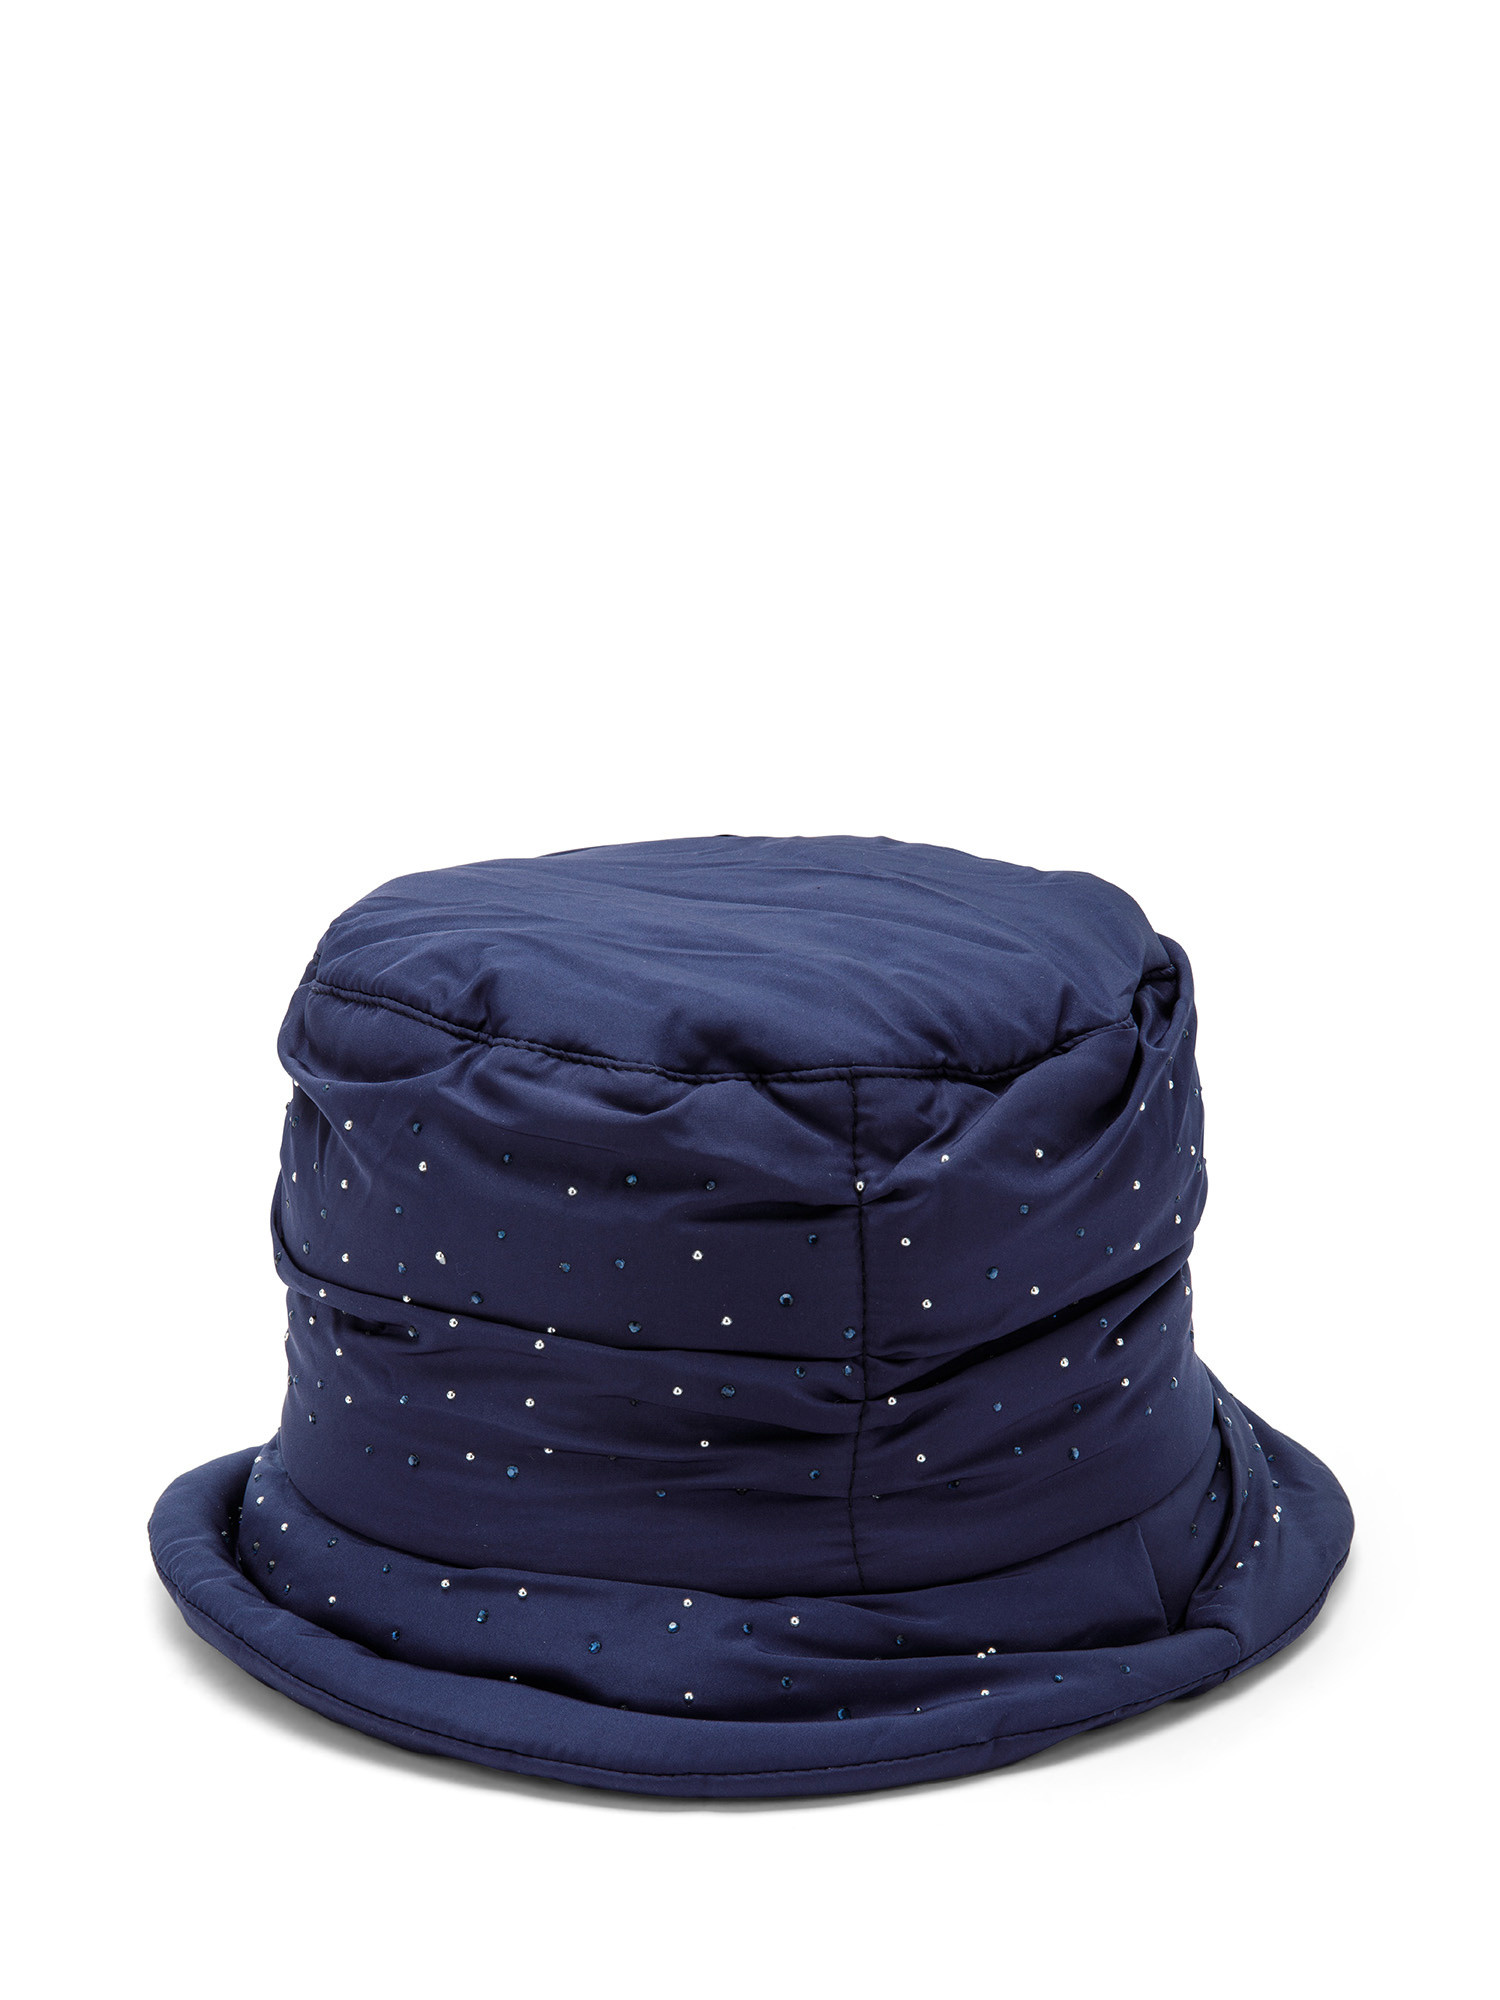 Koan - Cappello con strass, Blu, large image number 0